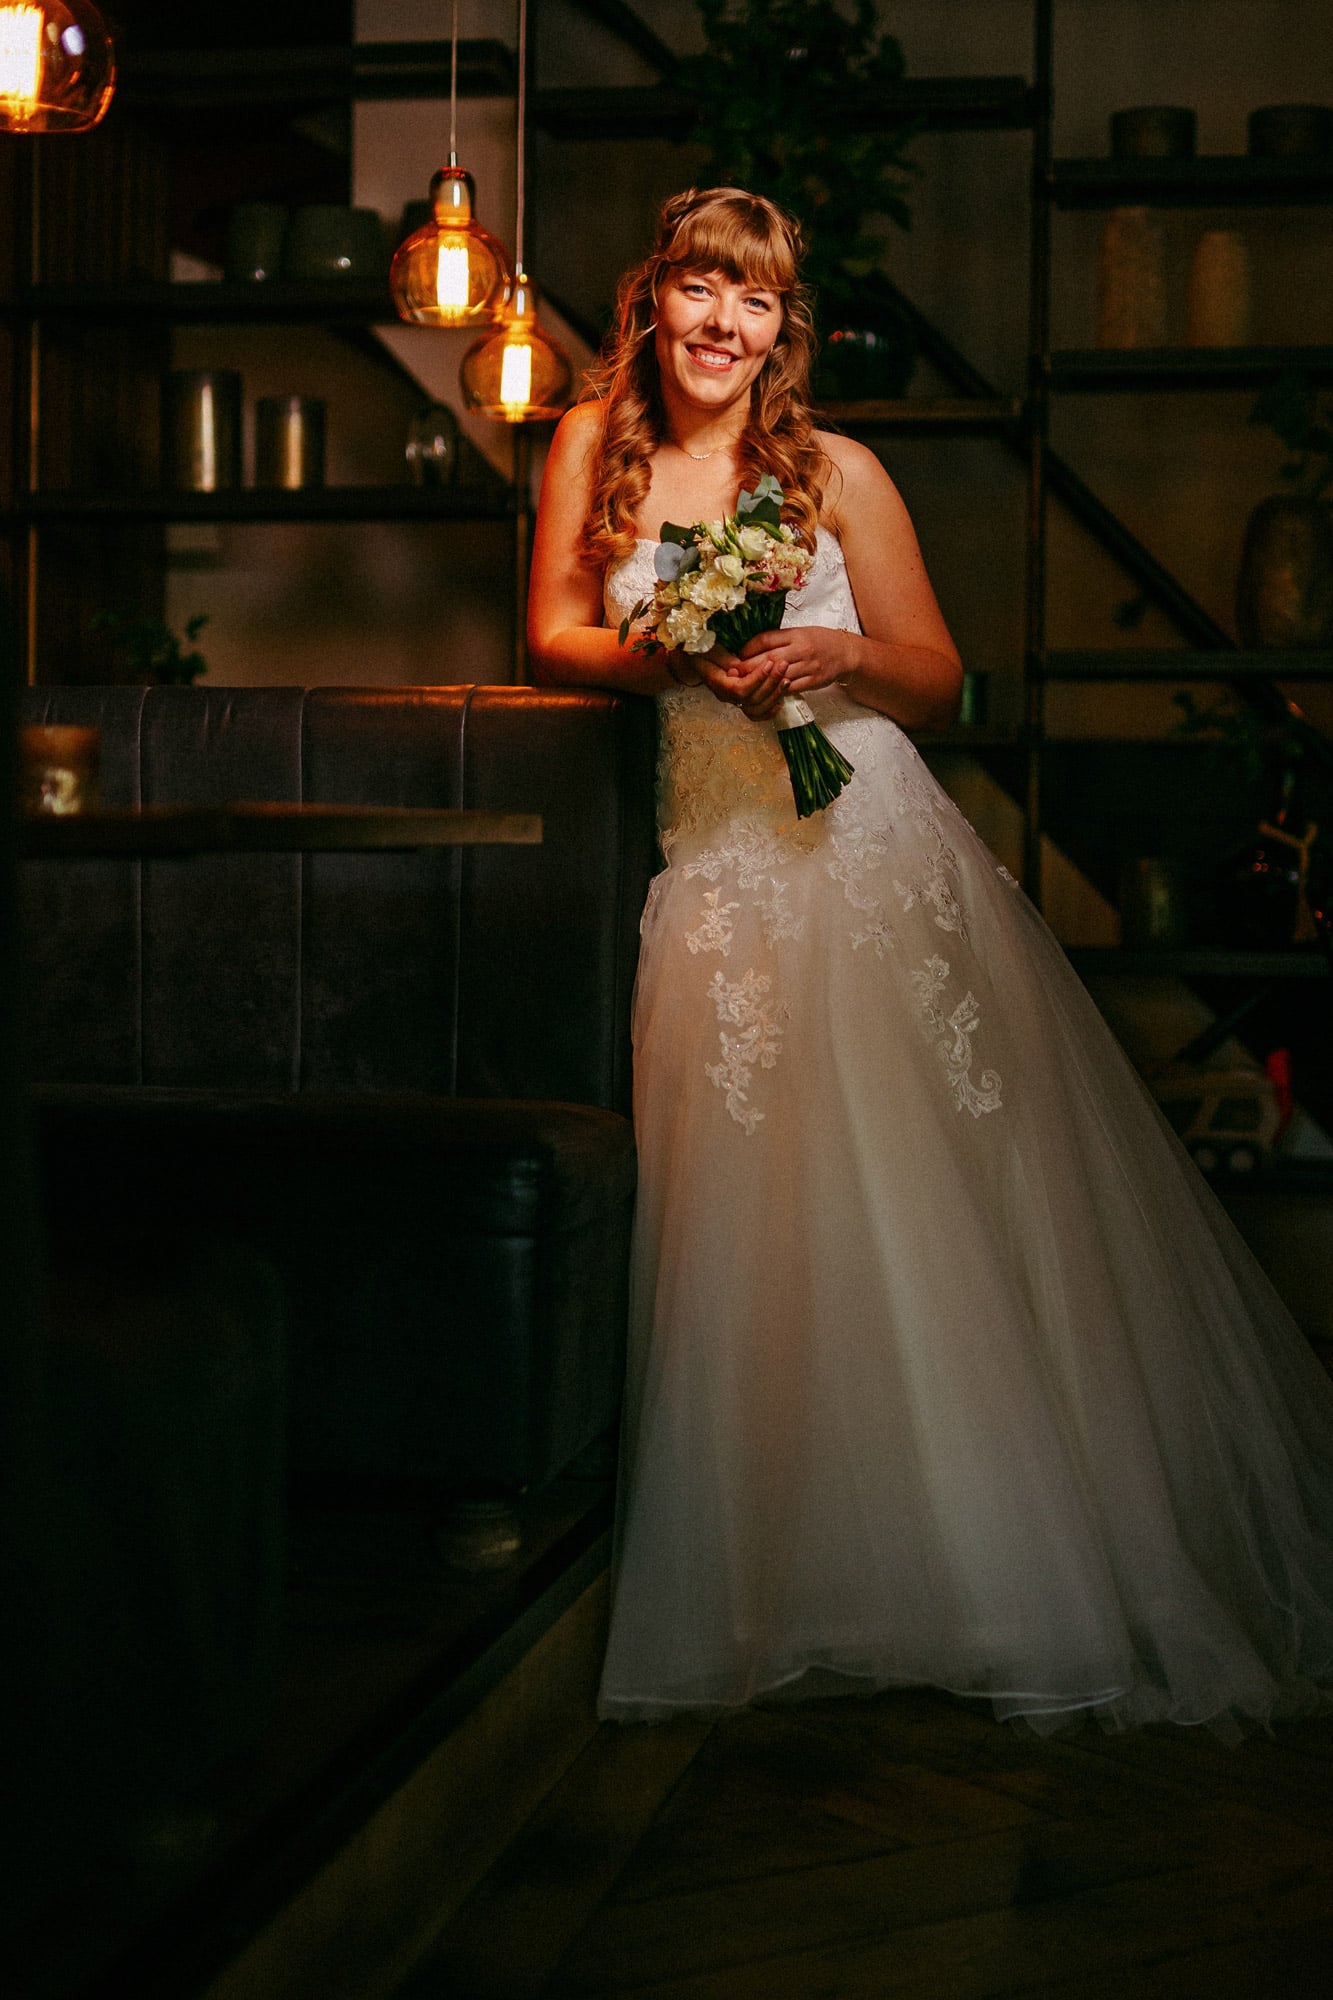 A bride poses for a photo with her beautiful Wedding Bouquet in a dimly lit room.